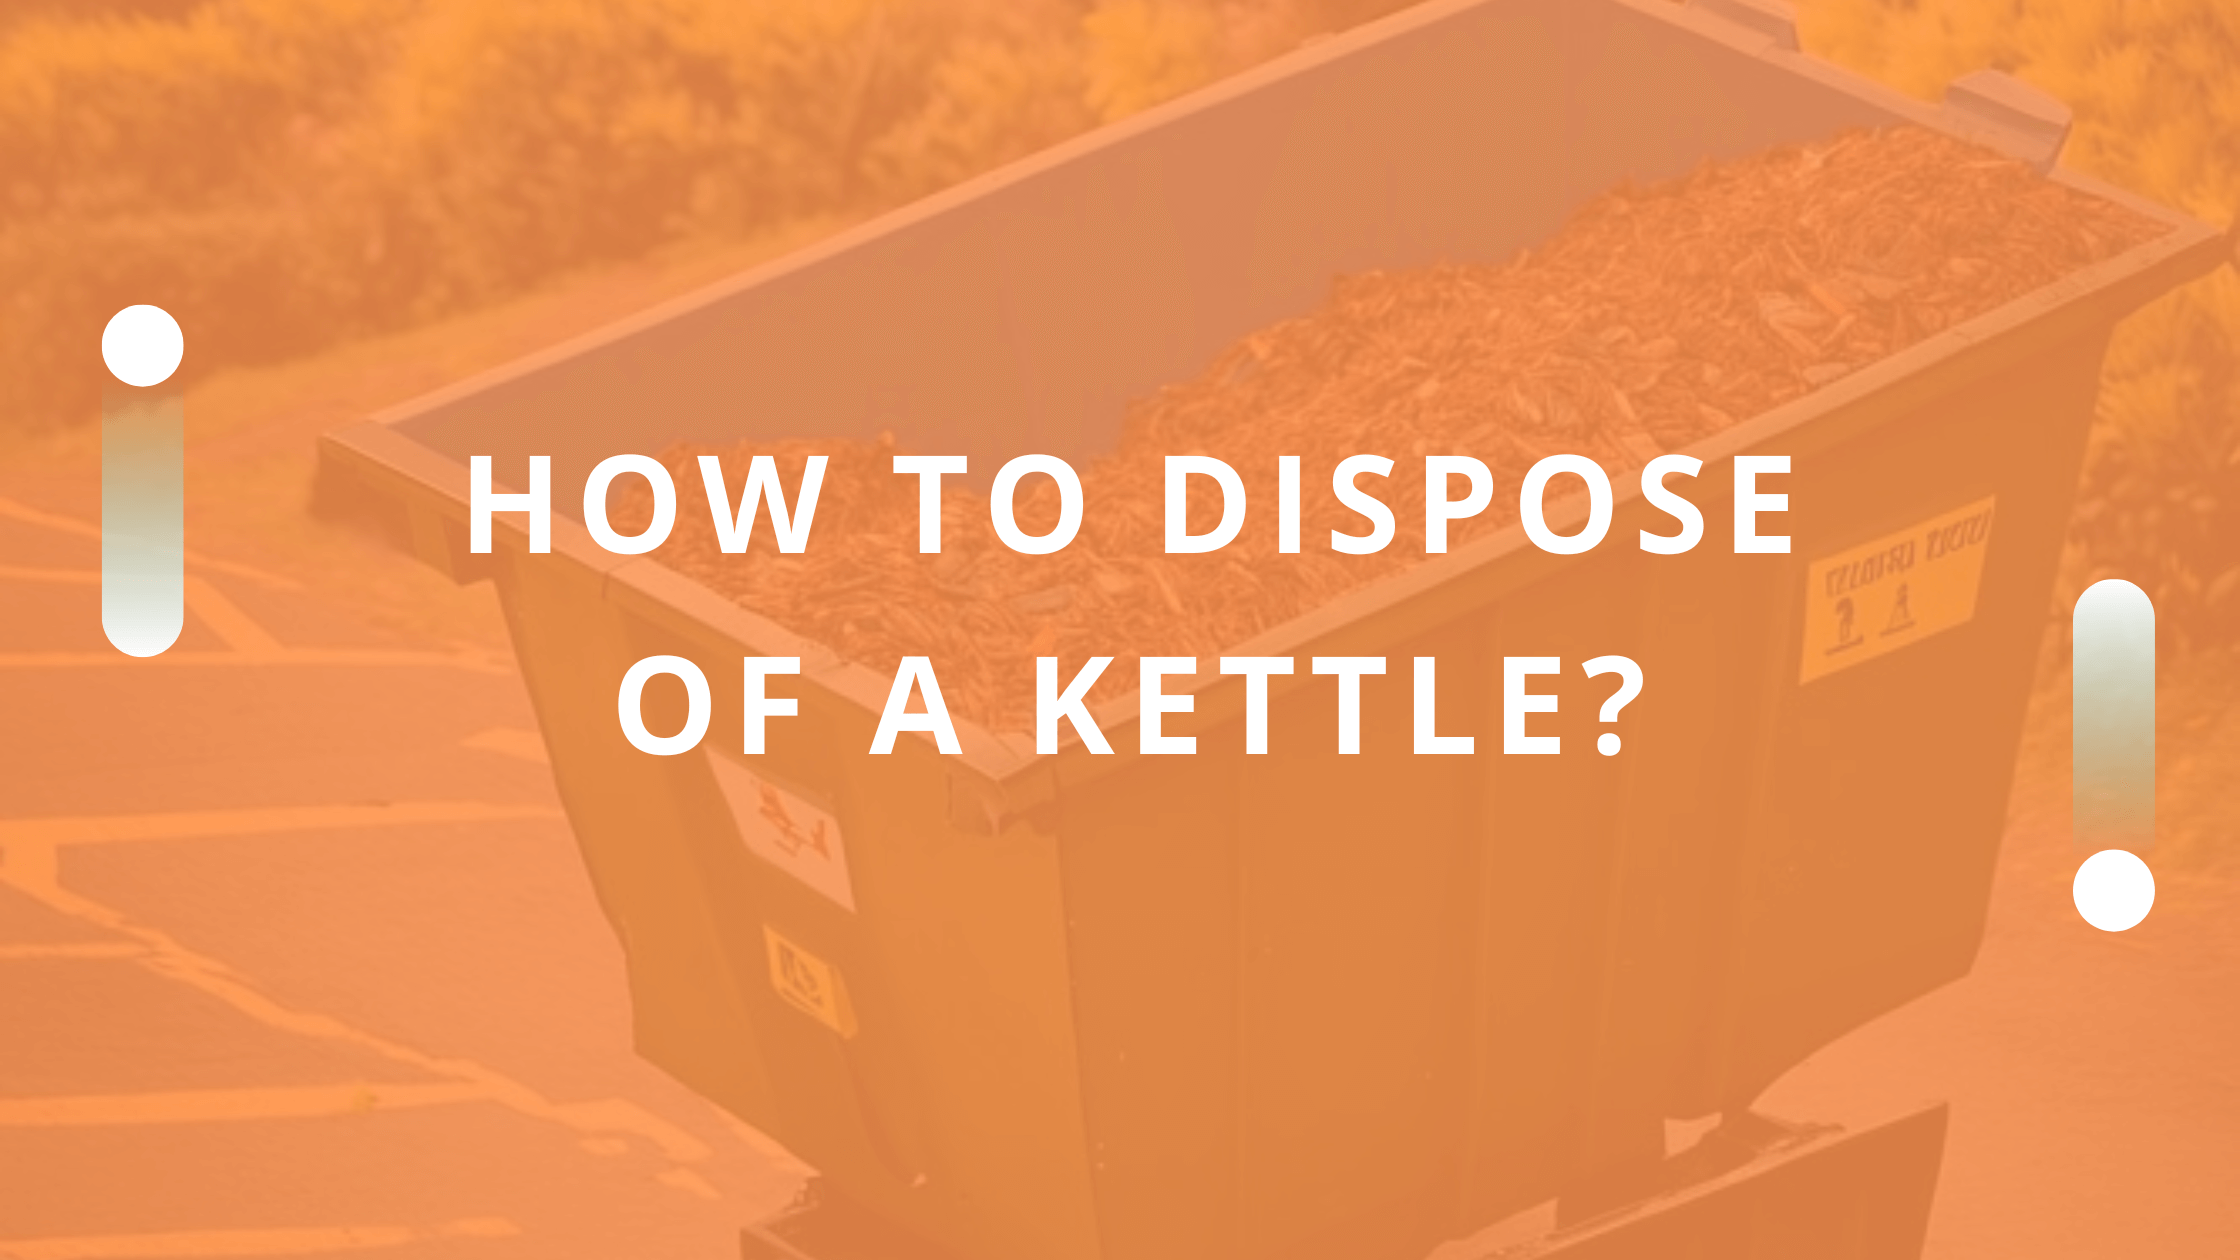 How to dispose of kettle safely